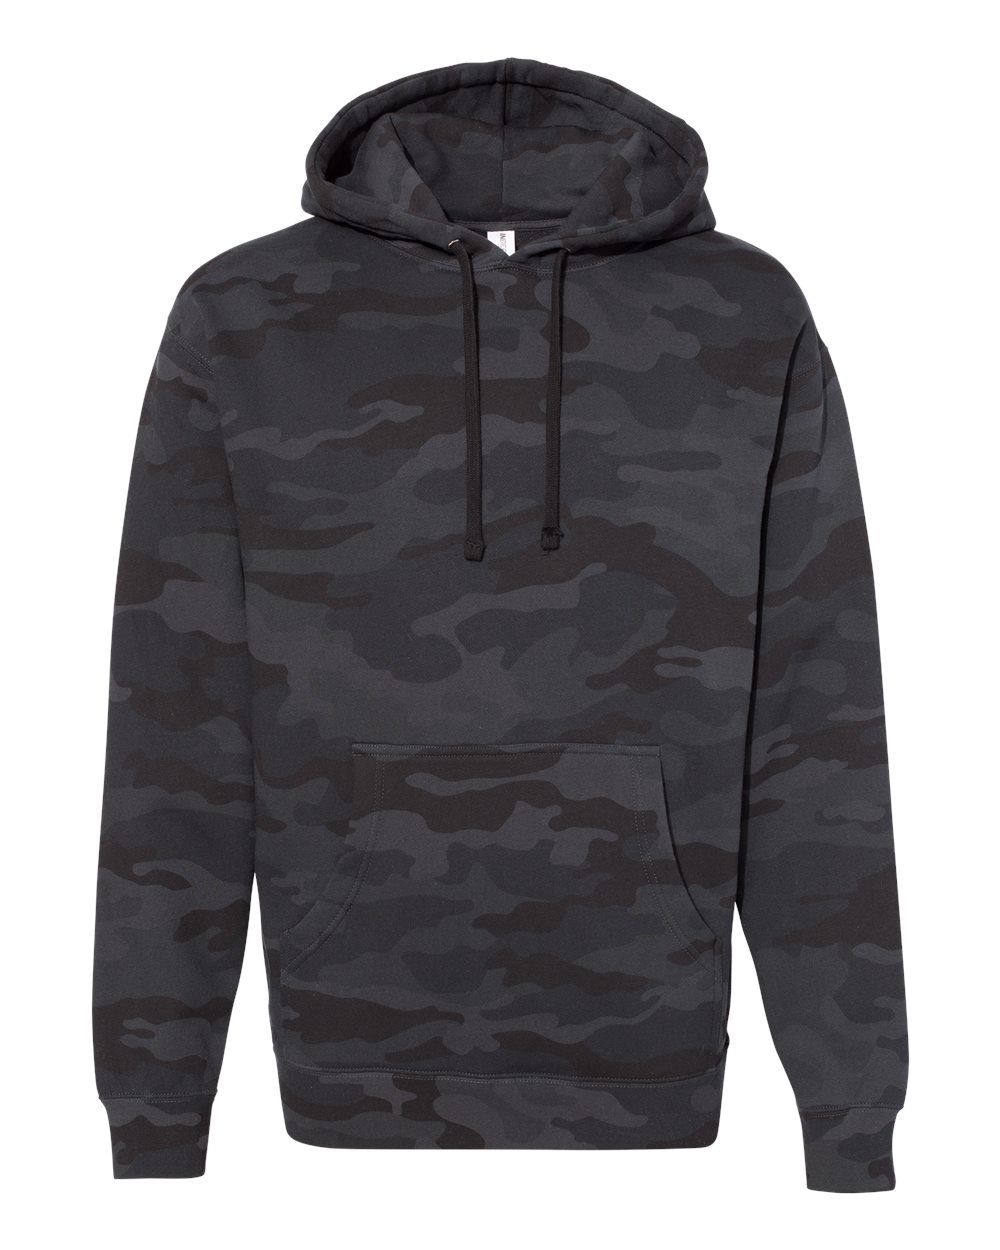 Bulk Order Heavyweight Hooded Sweatshirt by Independent Trading Co.